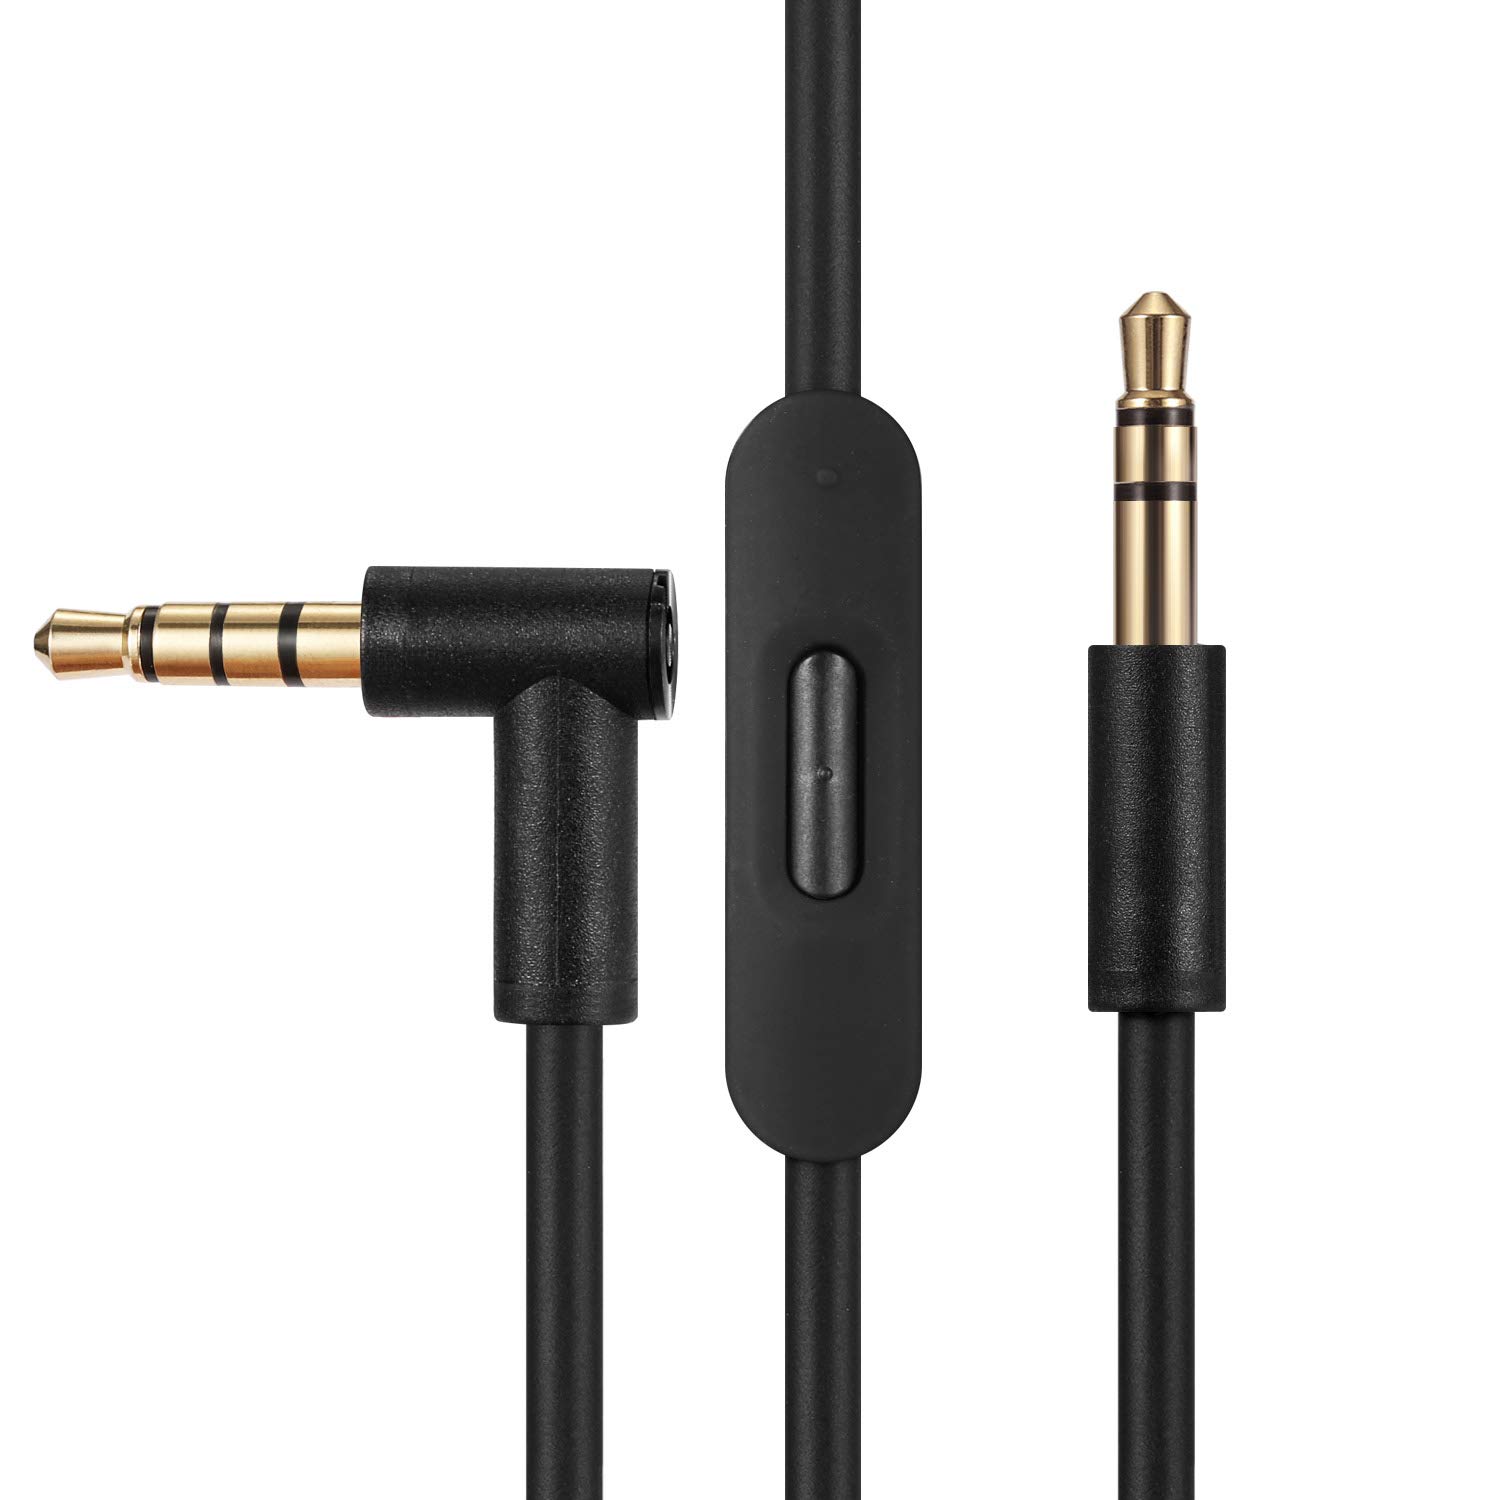 Replacement Audio Cable Cord Wire,Compatible with [...]